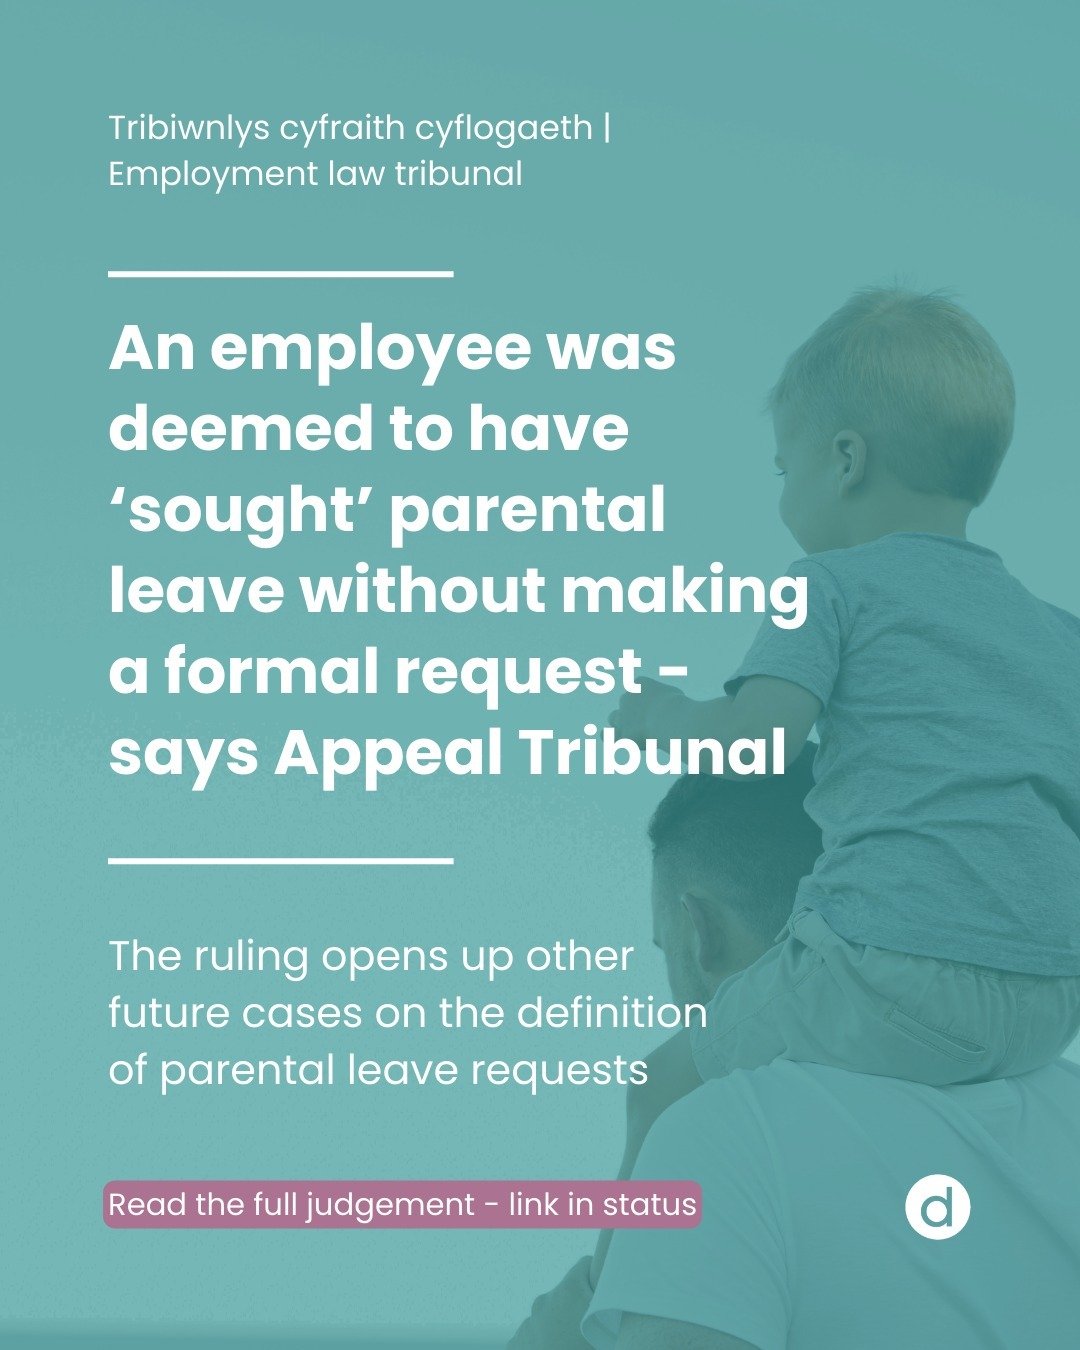 An Employment Appeal Tribunal found in favour of an employee who was dismissed despite 'seeking' parental leave. The employee did not subject a formal request and so the decision could open up new implications for future cases.

🏴󠁧󠁢󠁷󠁬󠁳󠁿 

Dyfa